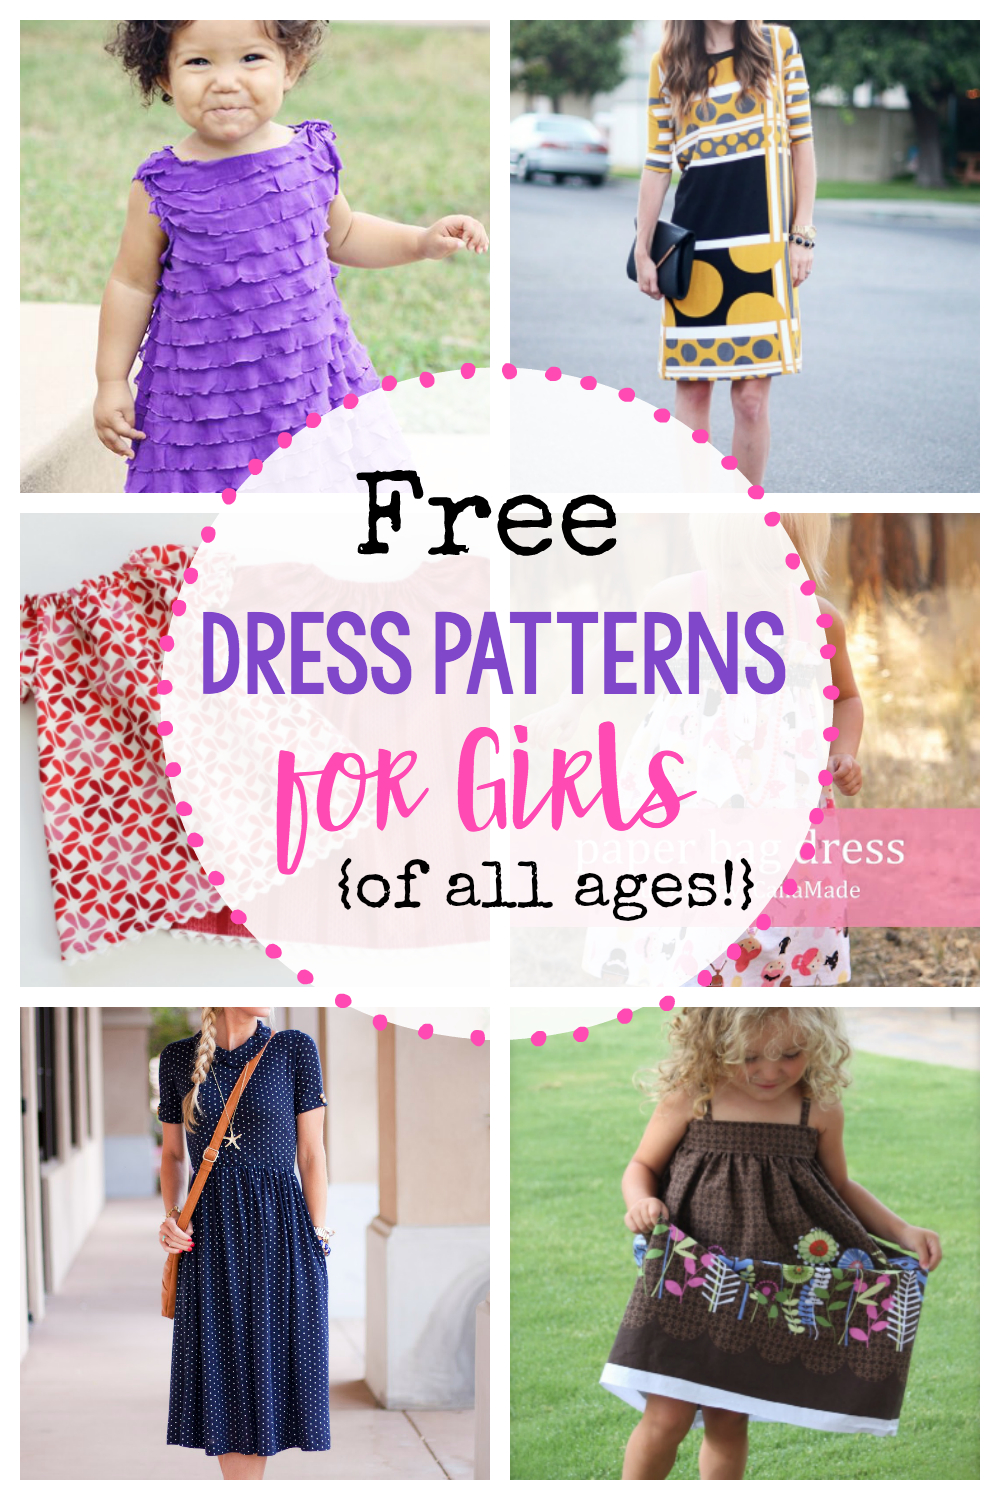 Jersey Knit Skirt Pattern 25 Free Dress Patterns For Girls Of All Ages Crazy Little Projects